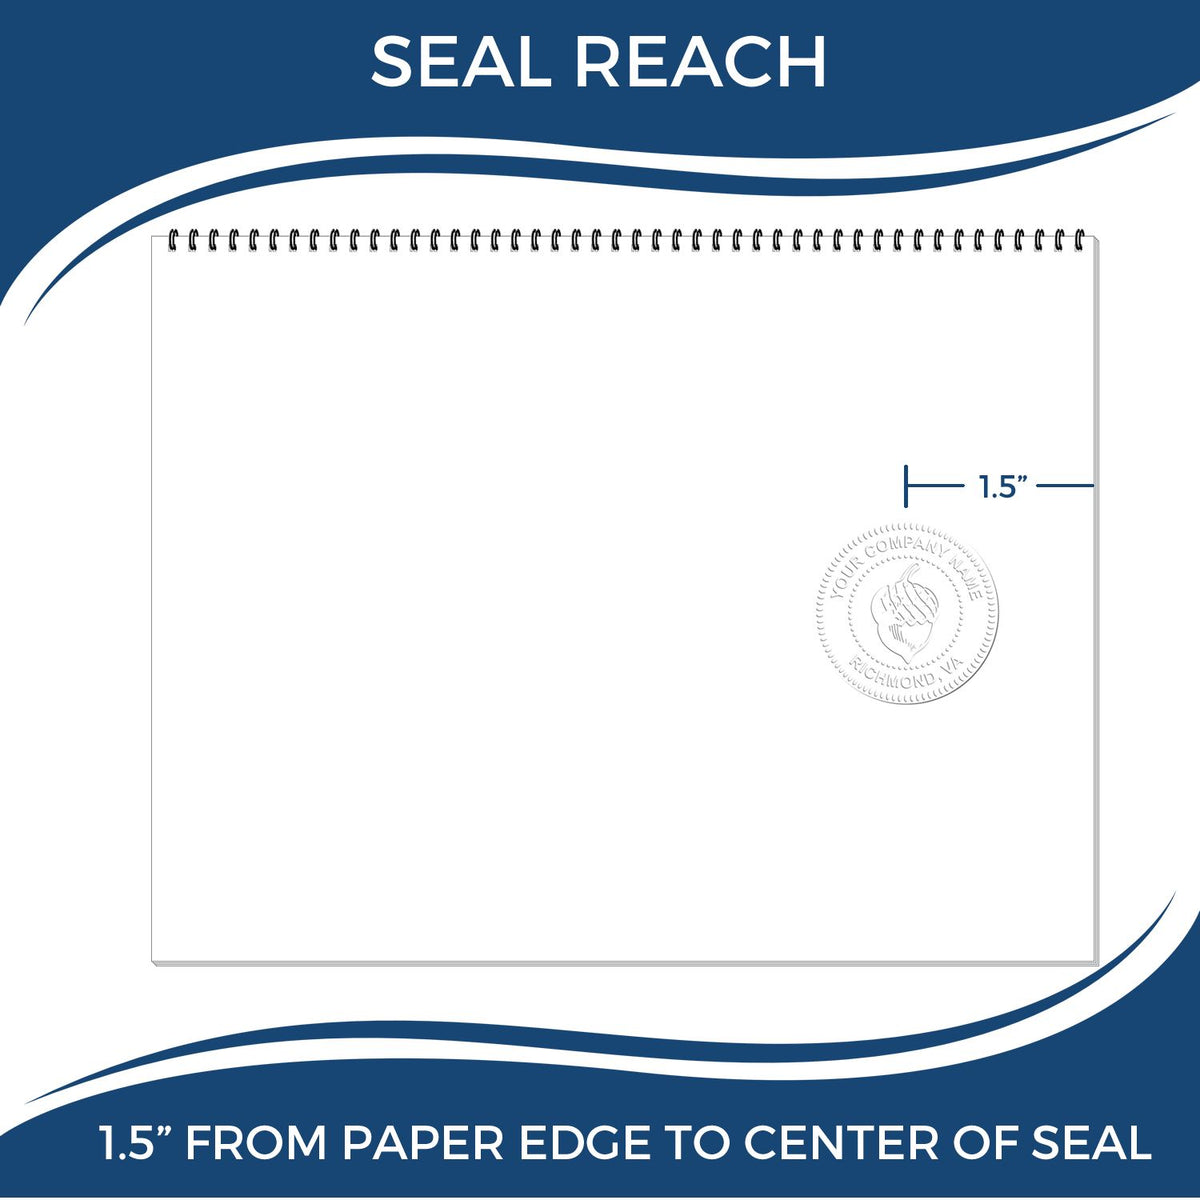 An infographic showing the seal reach which is represented by a ruler and a miniature seal image of the Soft Rhode Island Professional Engineer Seal